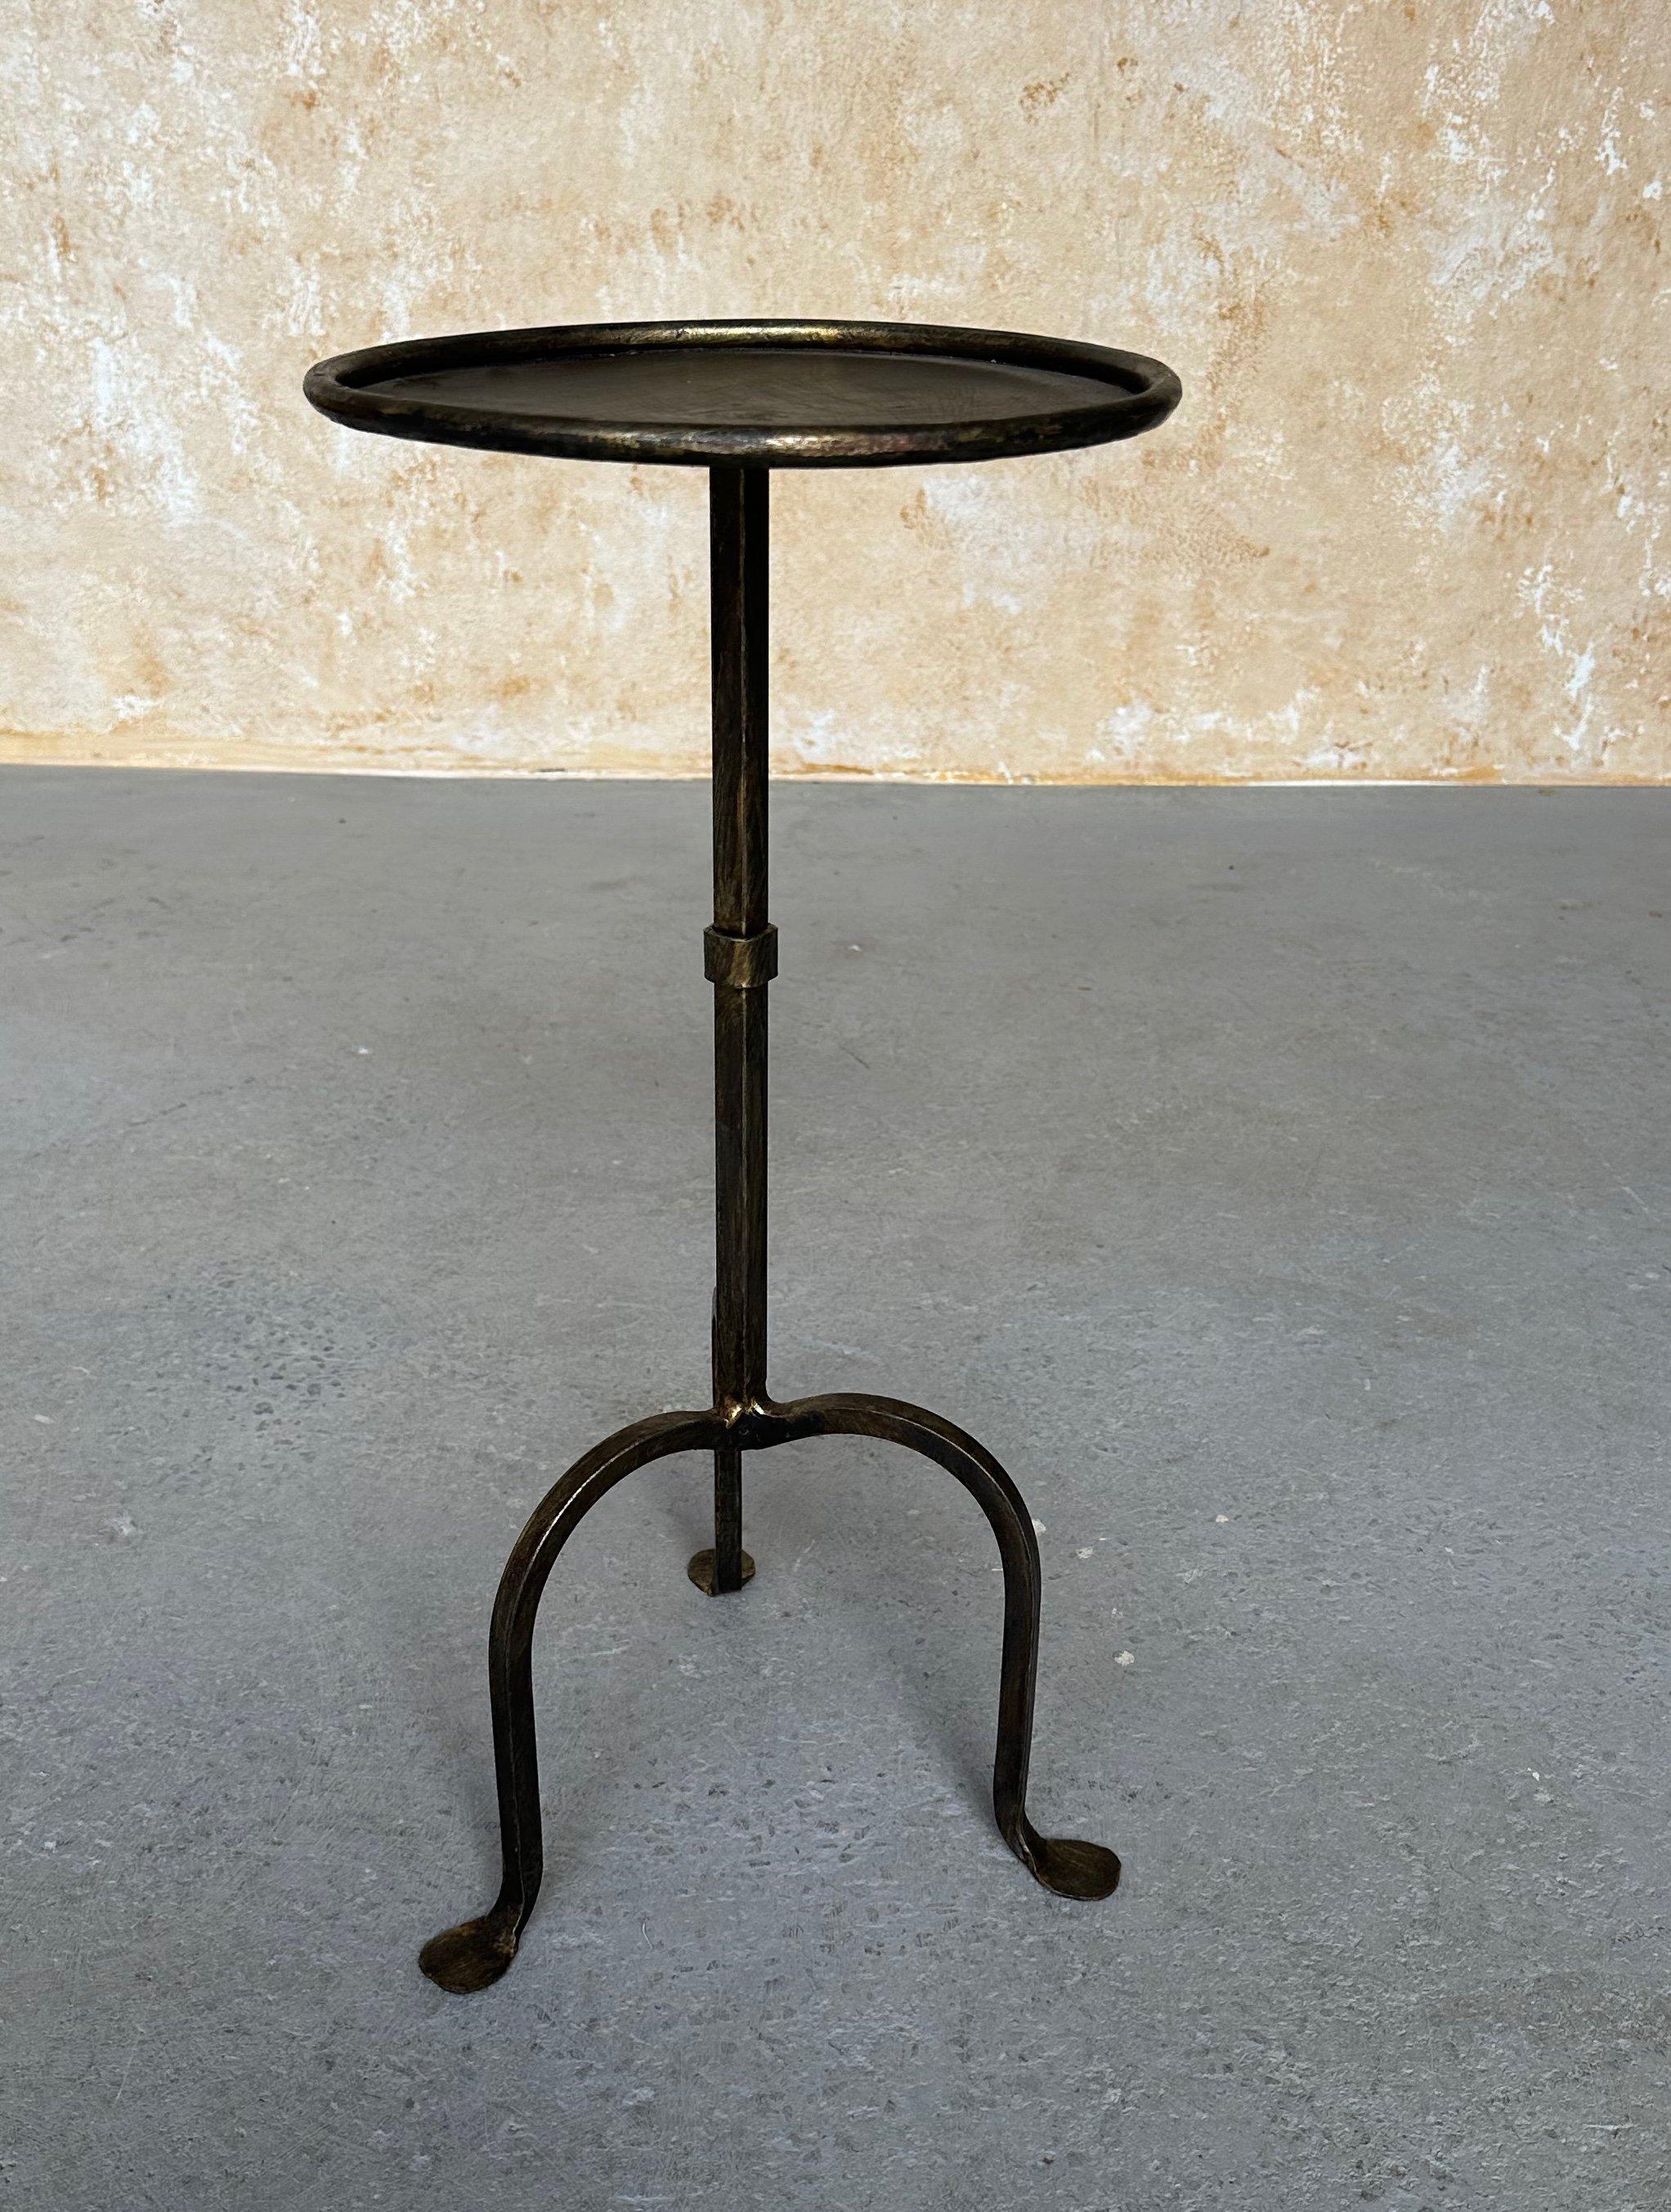 This small handcrafted Spanish iron end table was recently created by accomplished European artisans using traditional iron-working methods. Based on a vintage 1950s design, it features a square stem with a central ring accent and a gracefully